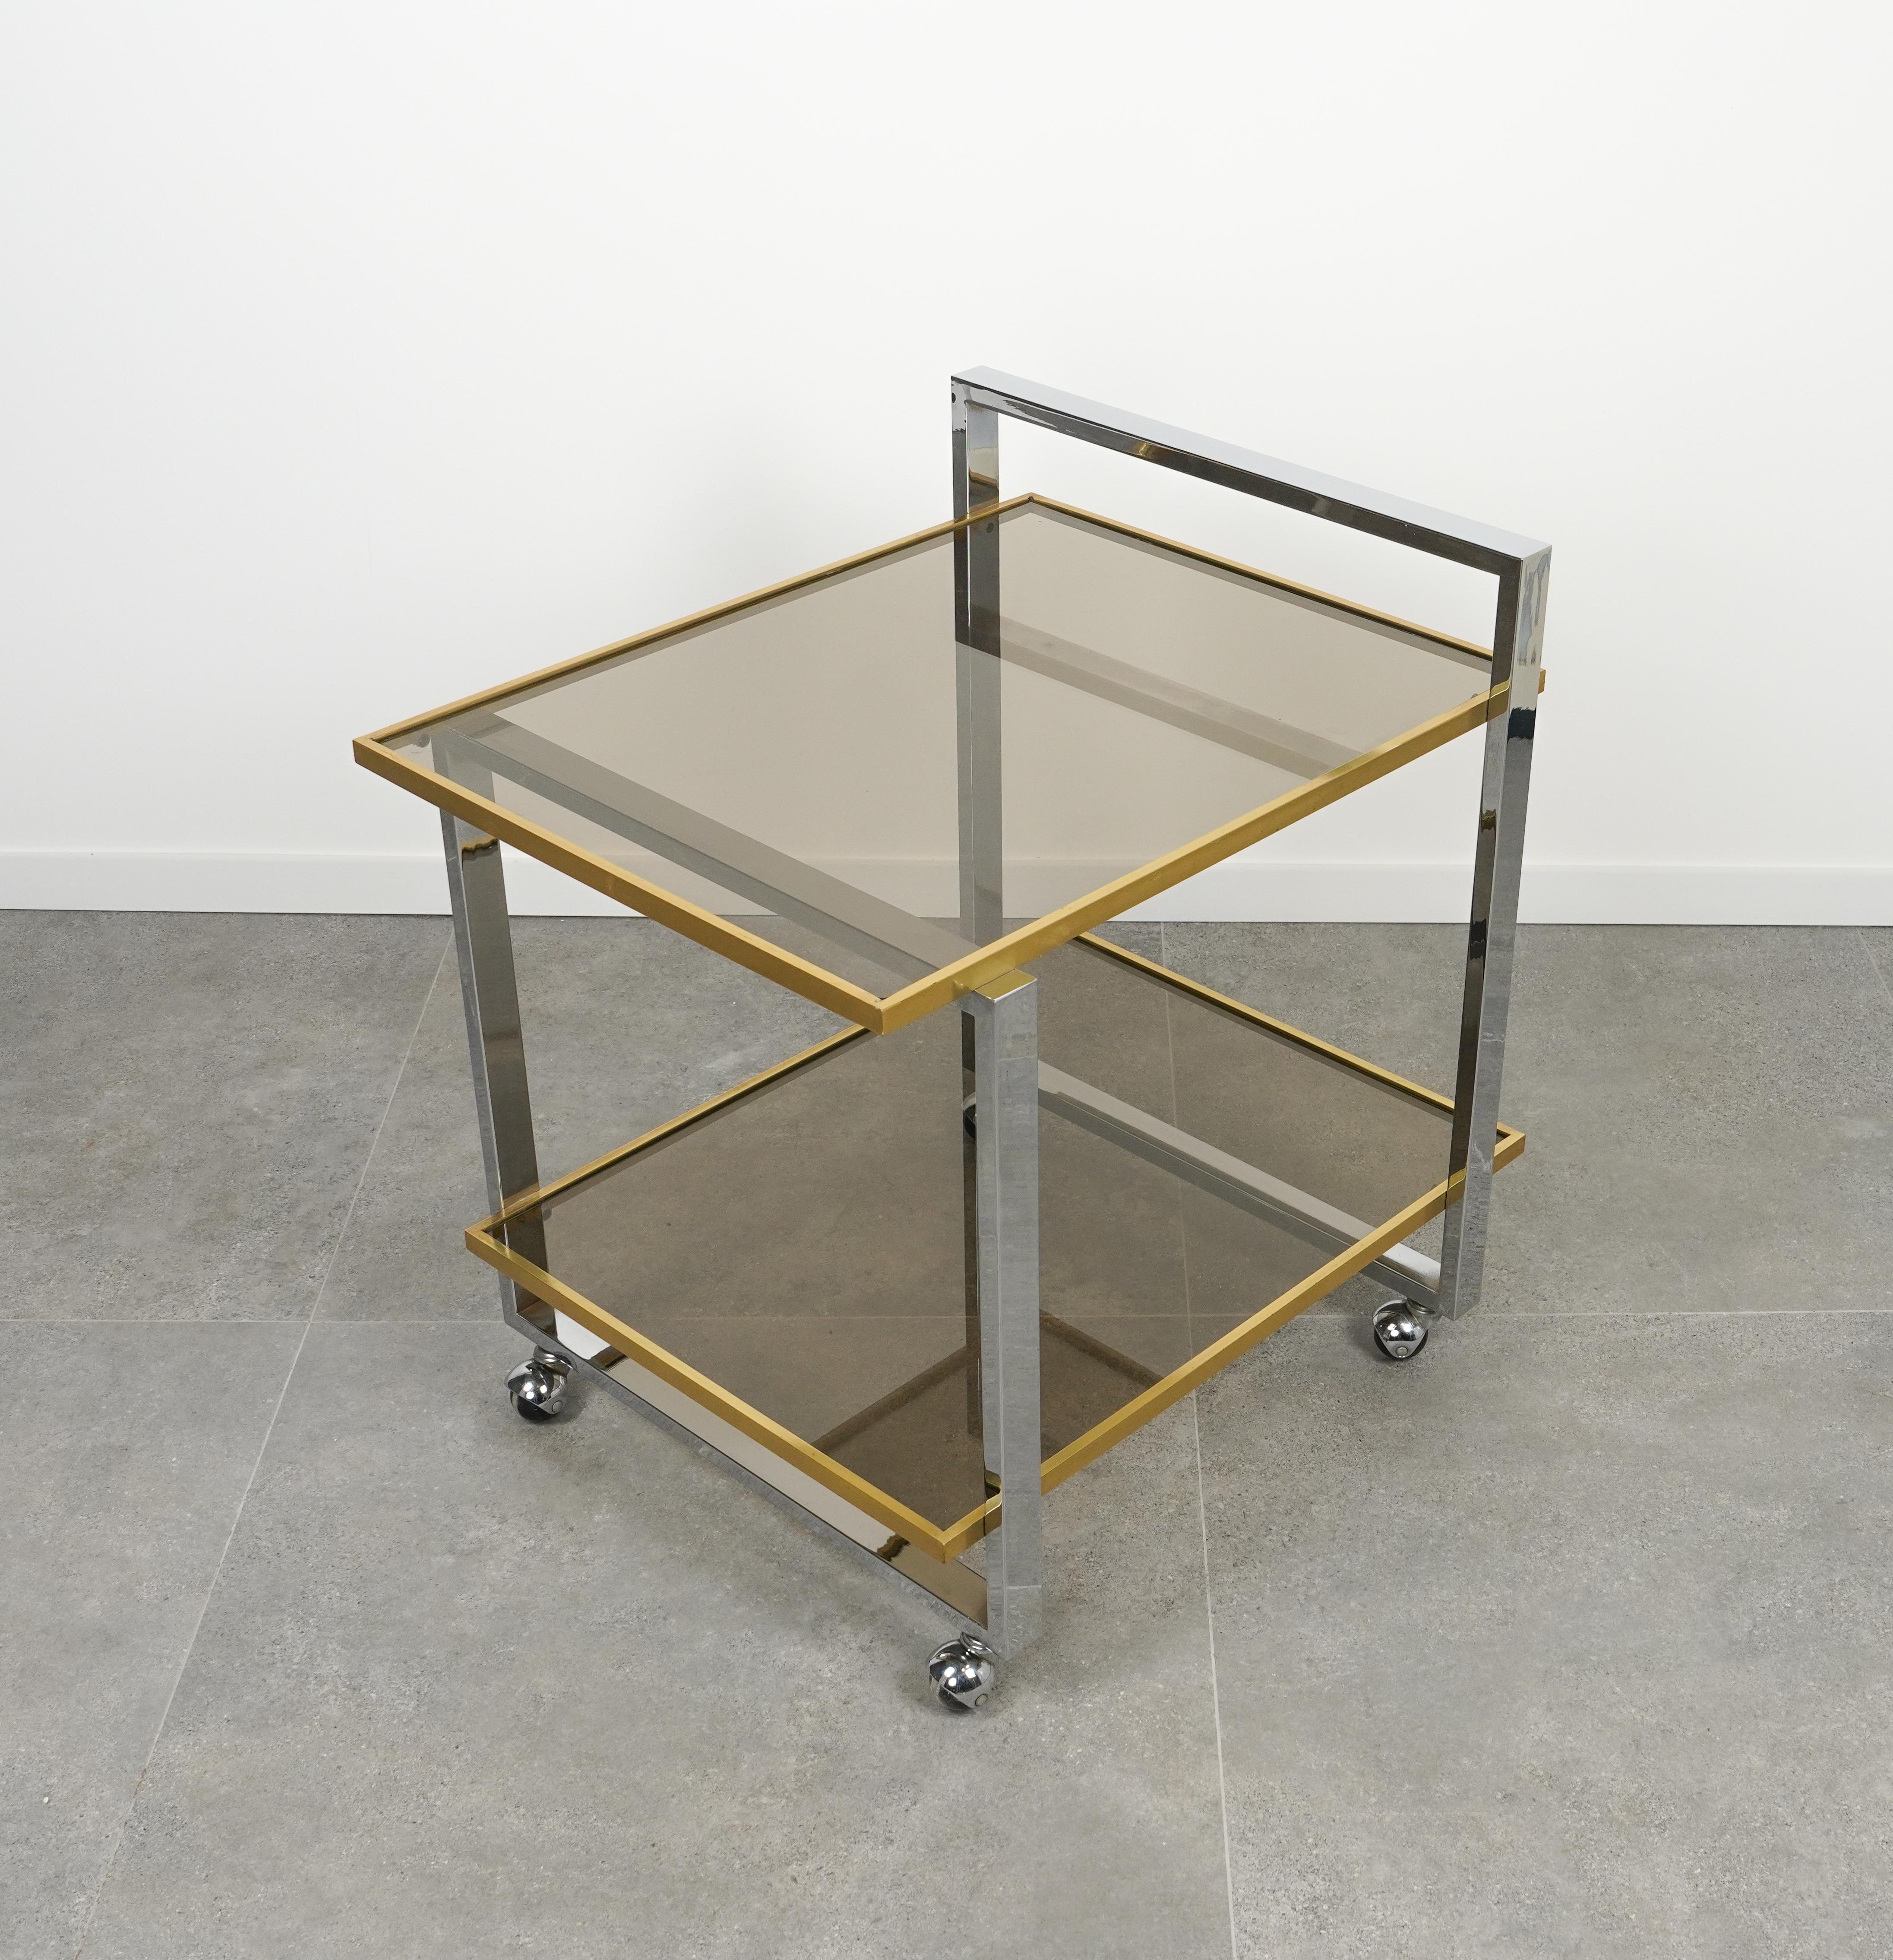 Italian Midcentury Serving Cart in Chrome, Brass and Glass by Romeo Rega, Italy 1970s For Sale